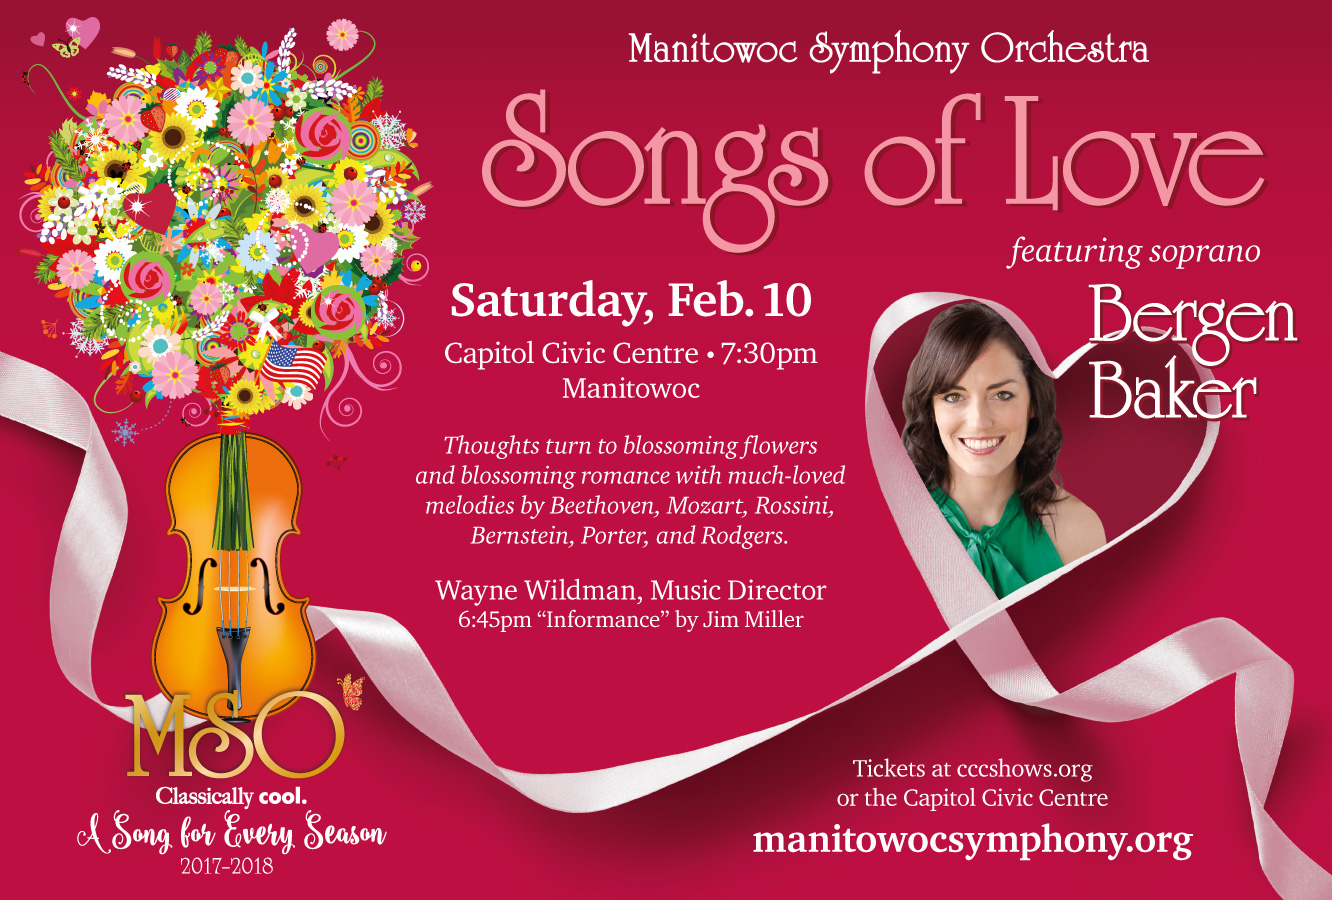 poster for song of love - red background with a white heart and a photo of the soloist Bergen Baker and The season graphic of a violin with a colorful and fun bouquet full of flowers, hearts at the left.